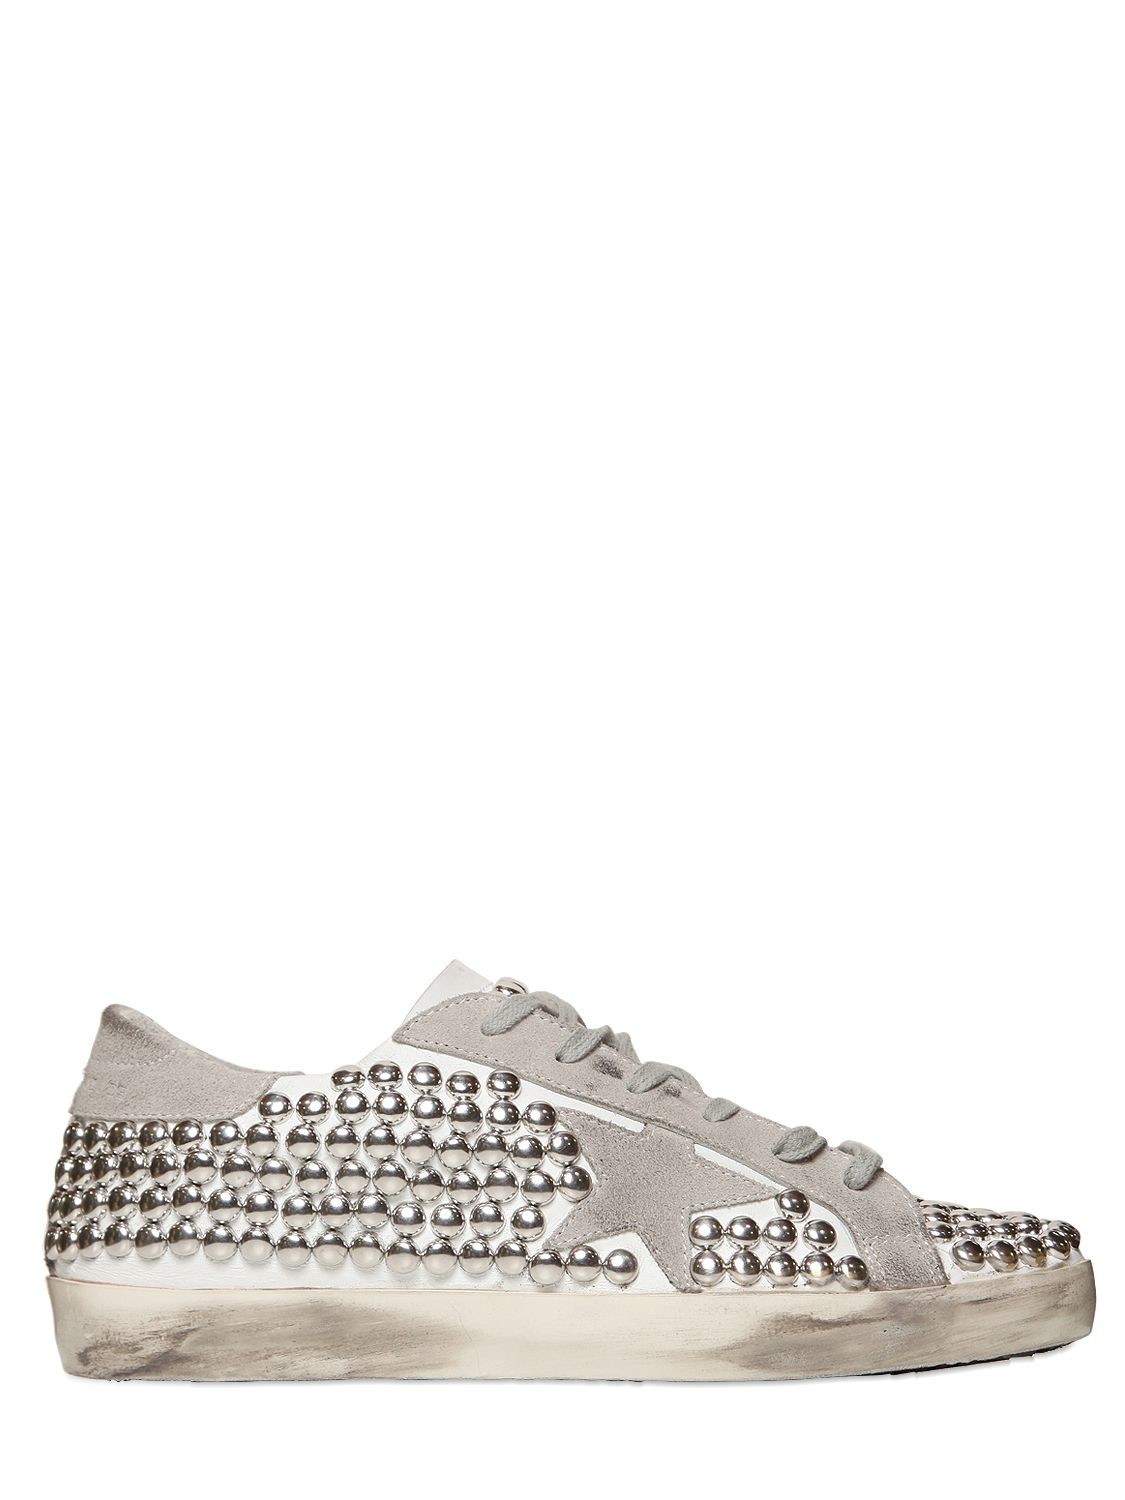 Golden goose deluxe brand 10mm Super Star Studded Leather Sneakers ...